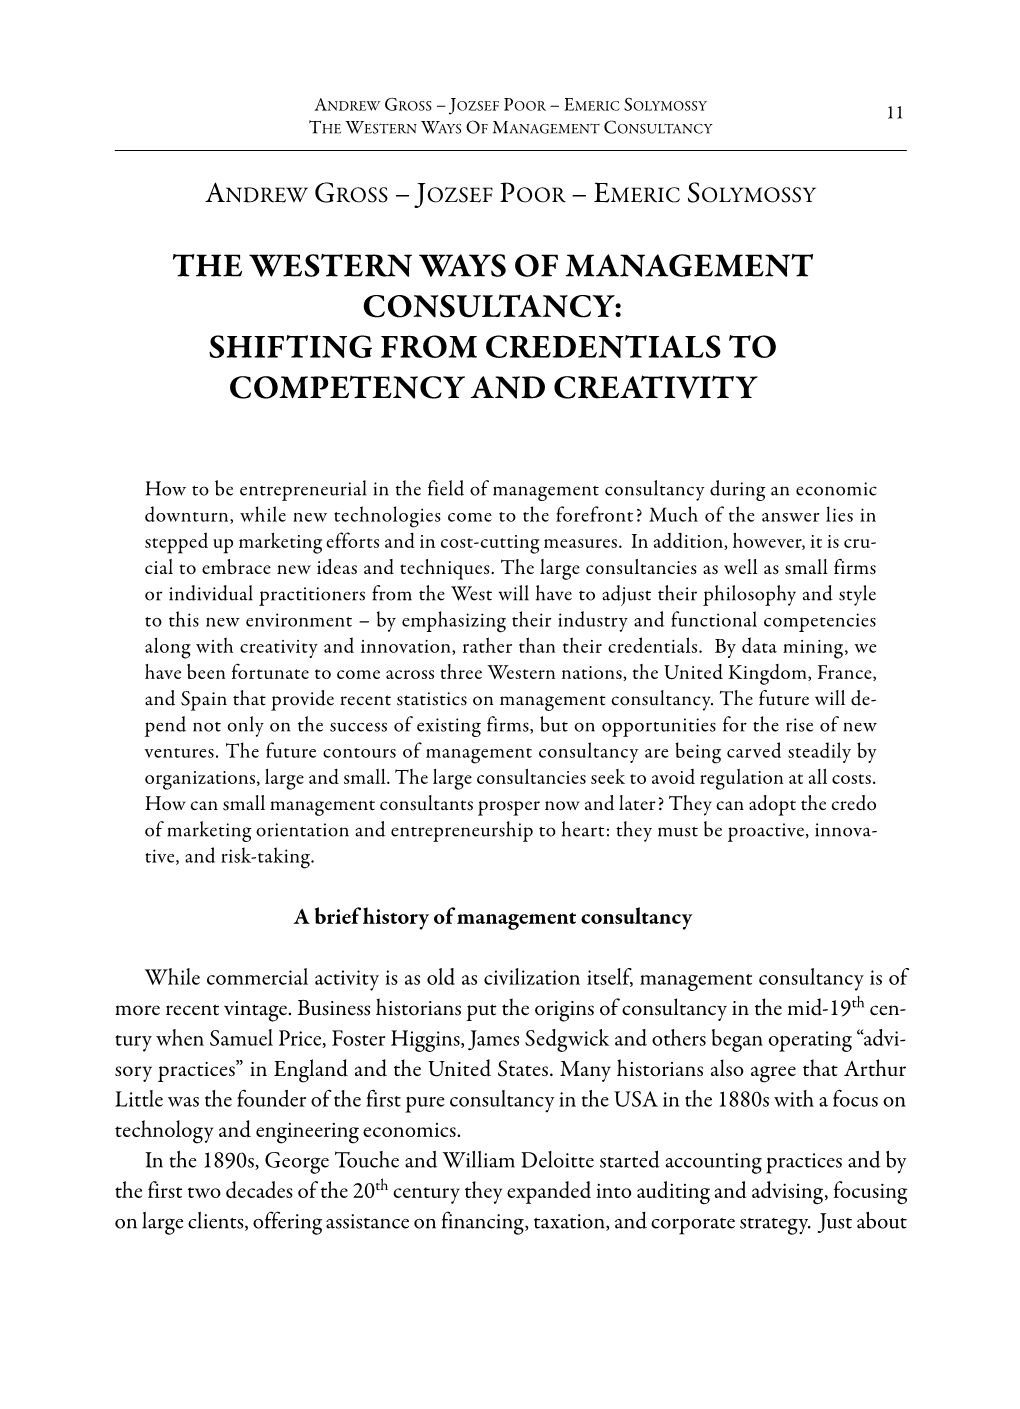 The Western Ways of Management Consultancy